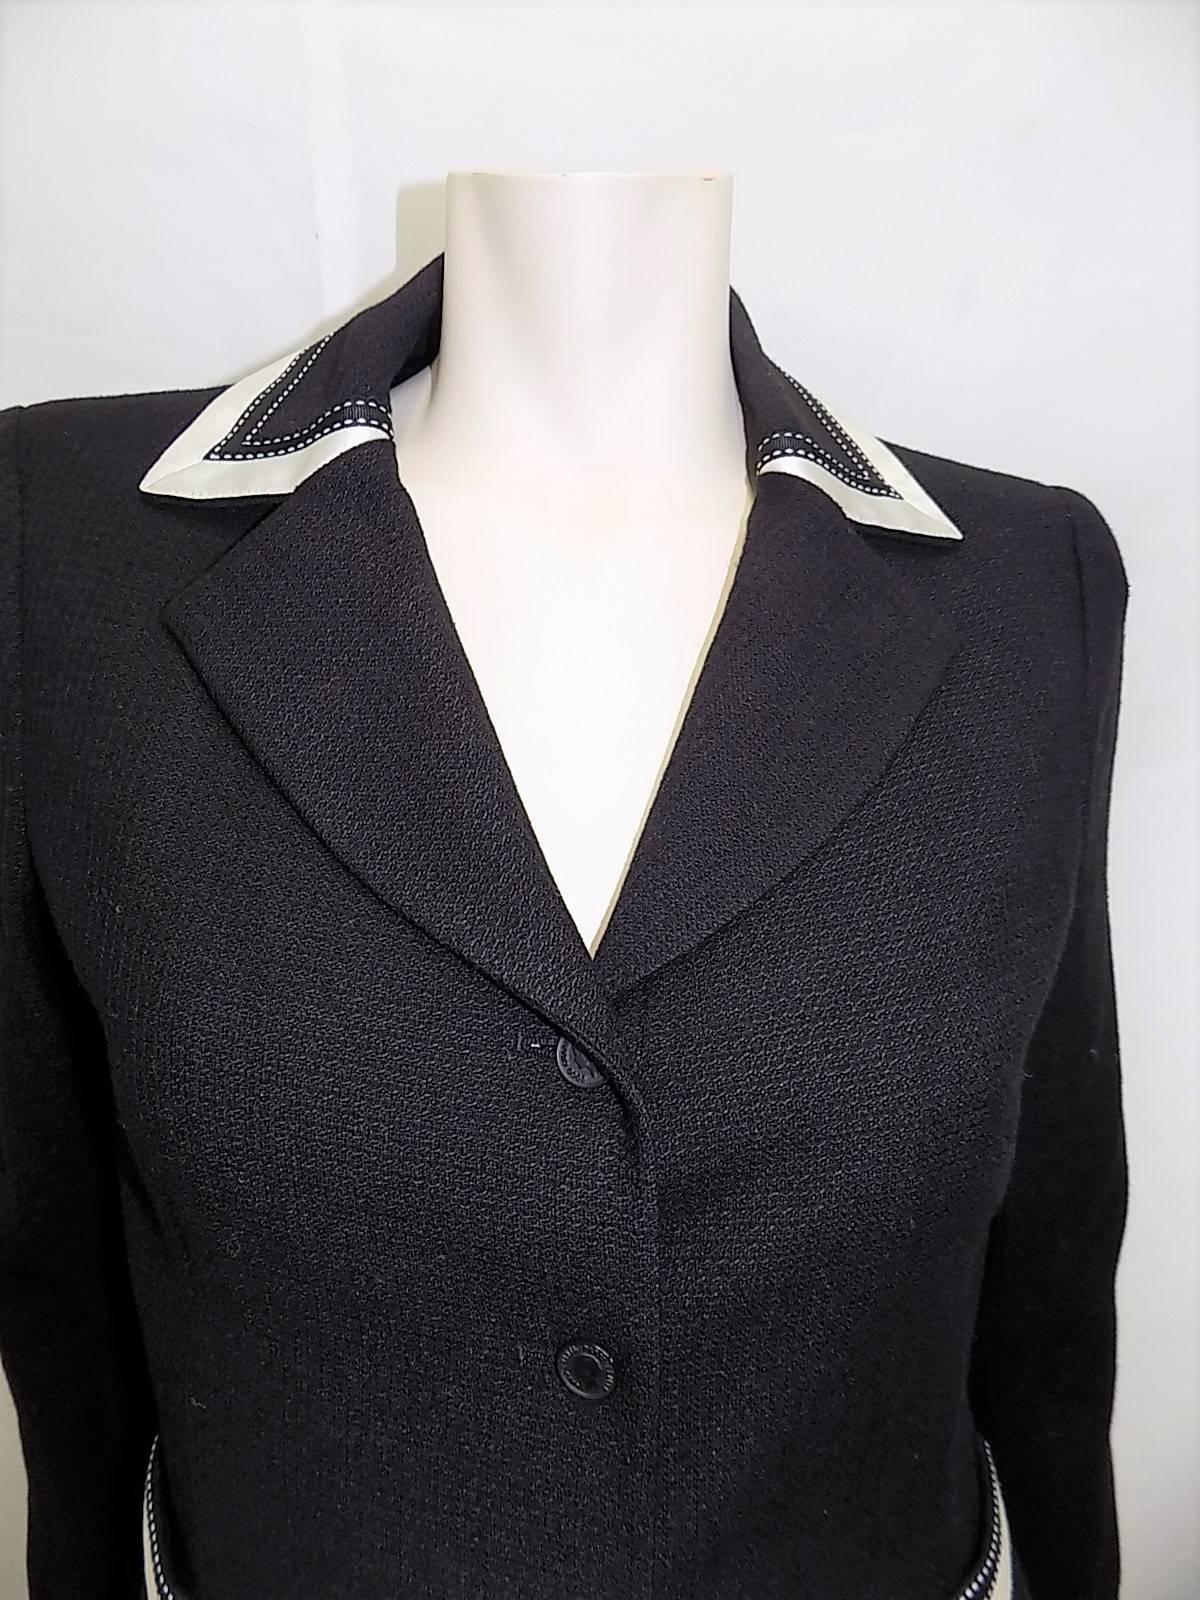 Chanel Black Jacket with white Silk trim Details  For Sale 2